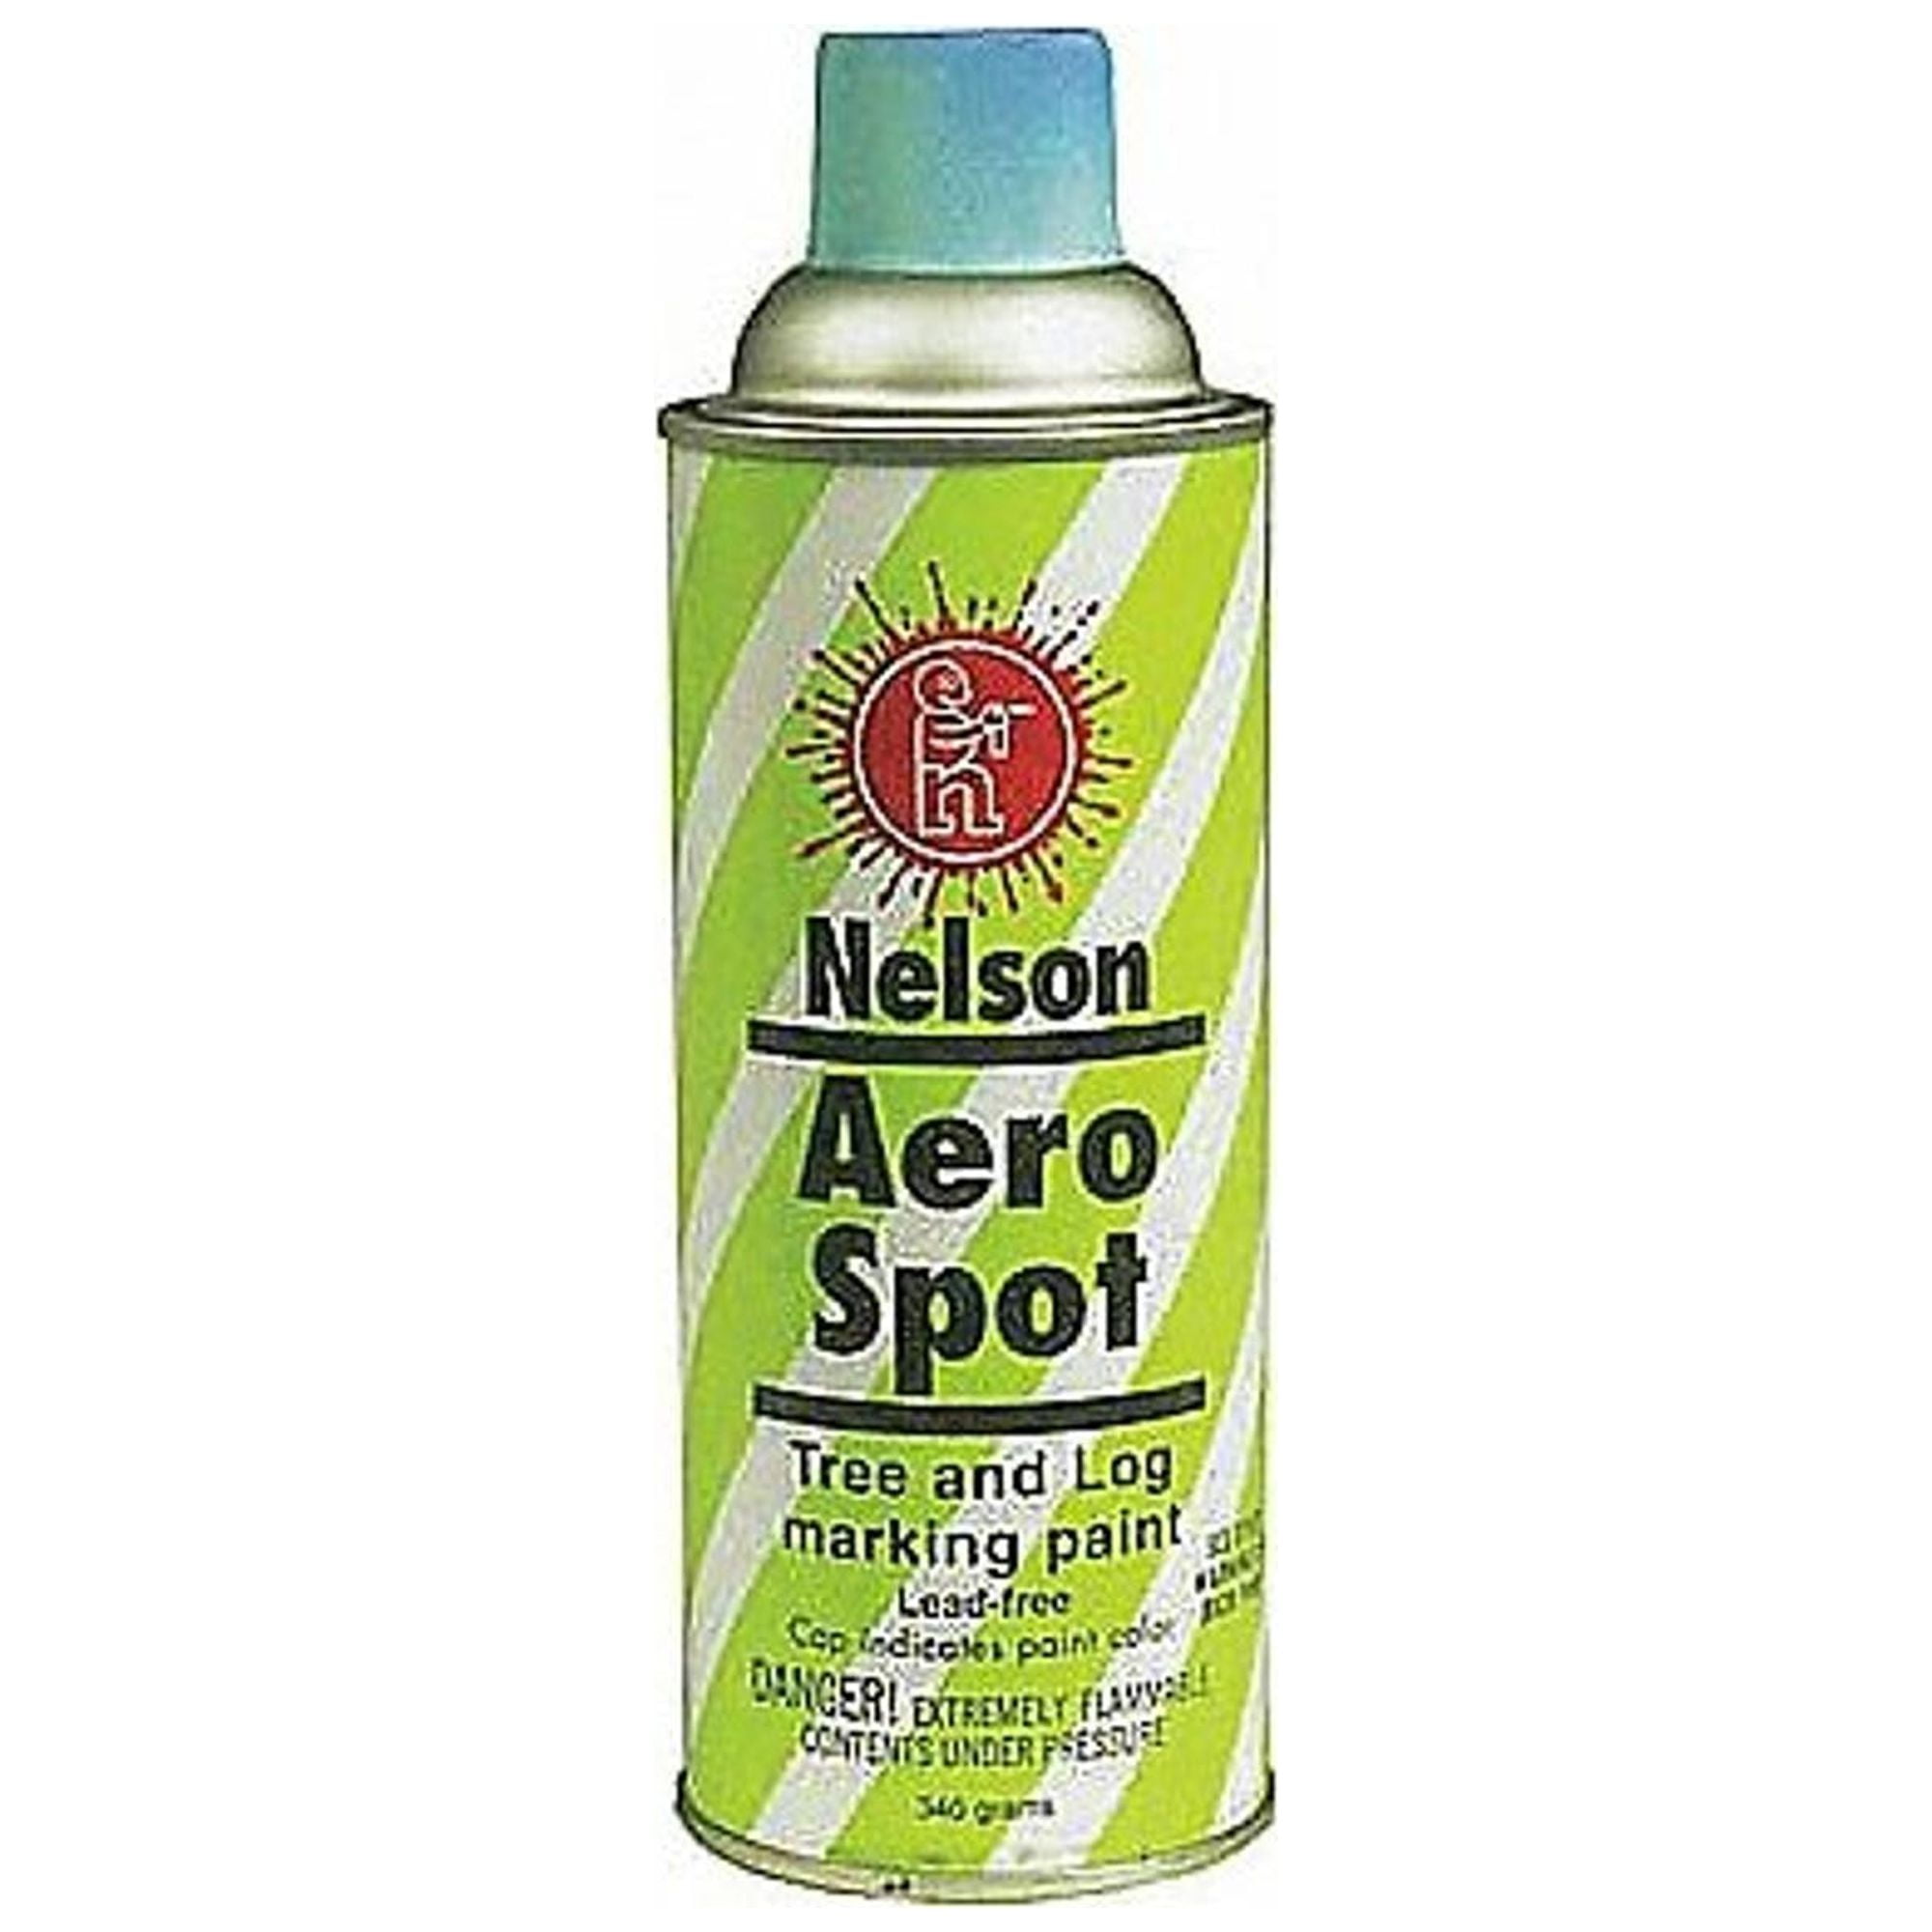 Nelson Aero Spot® Marking Paint 12 Oz Can Case of 24 - The Nelson